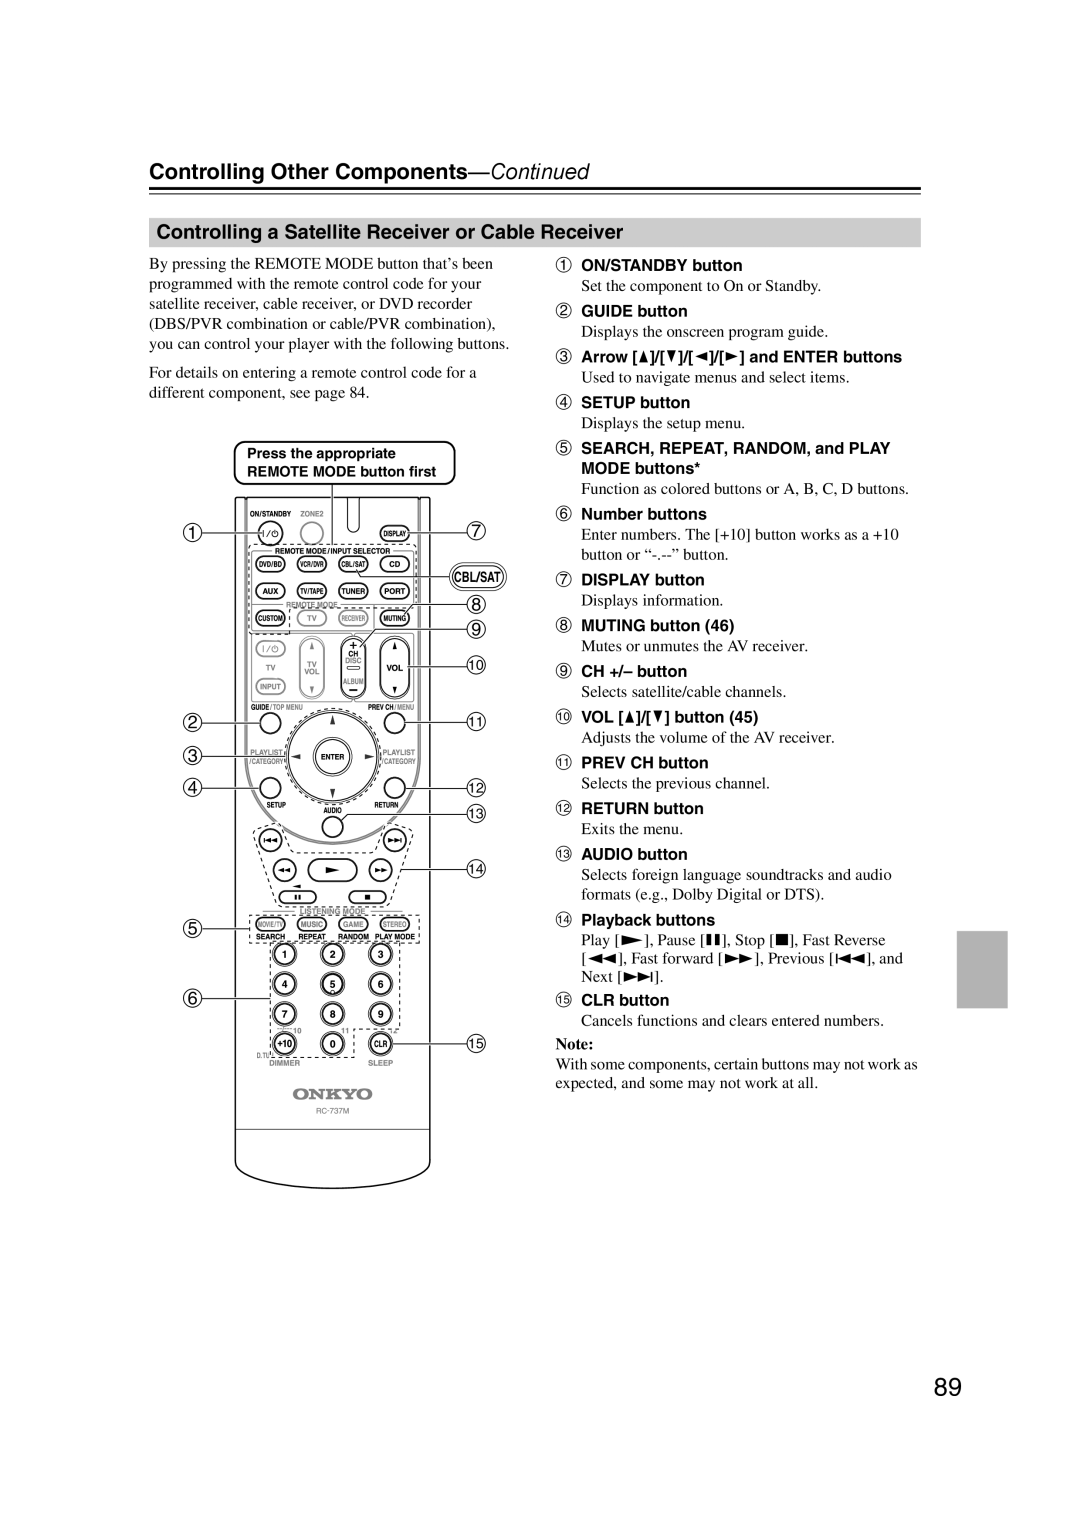 Onkyo SR507, TX-SR577 instruction manual m n e f o, Controlling Other Components—Continued 